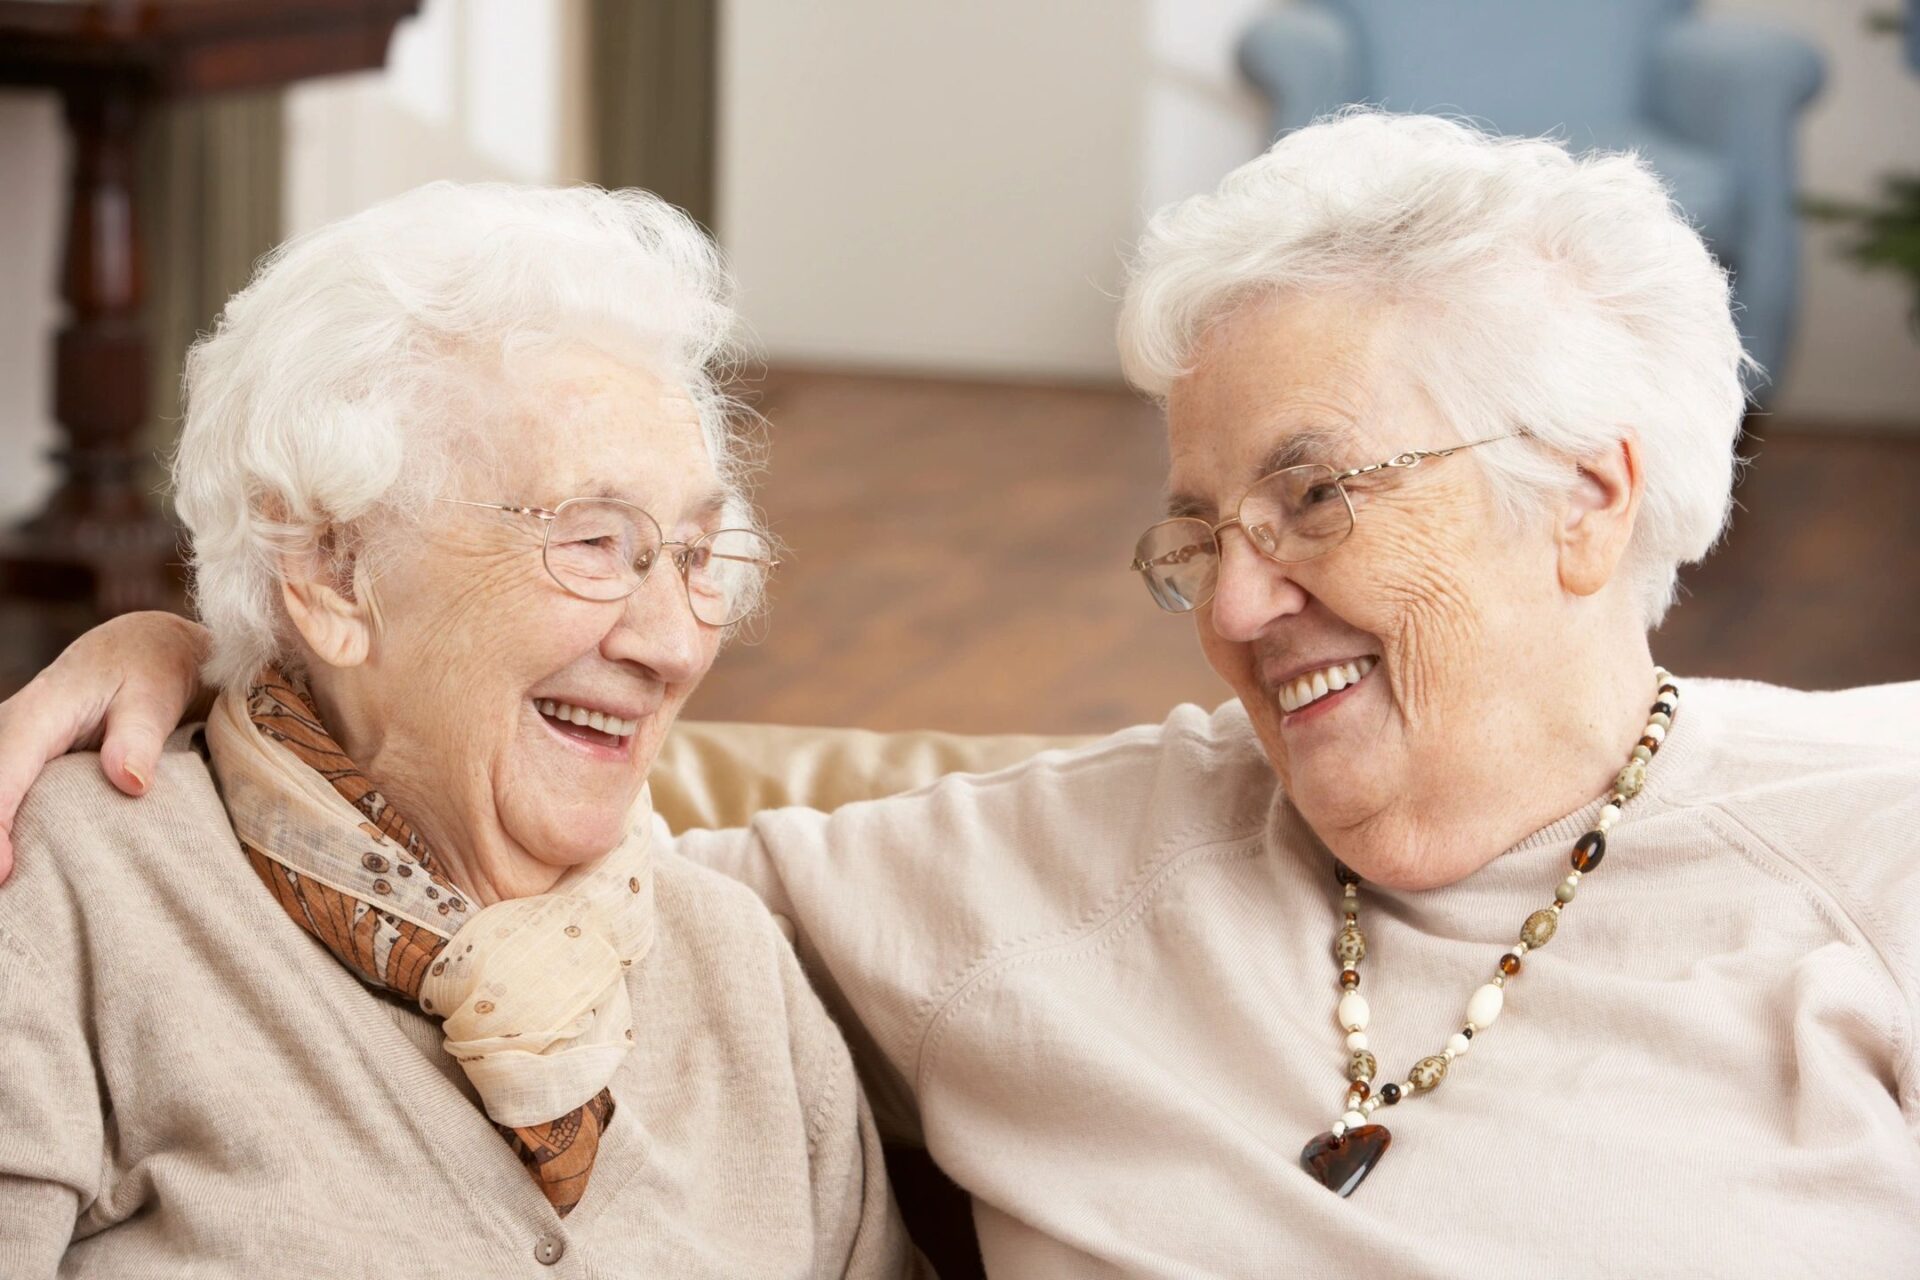 Two elderly women laughing together